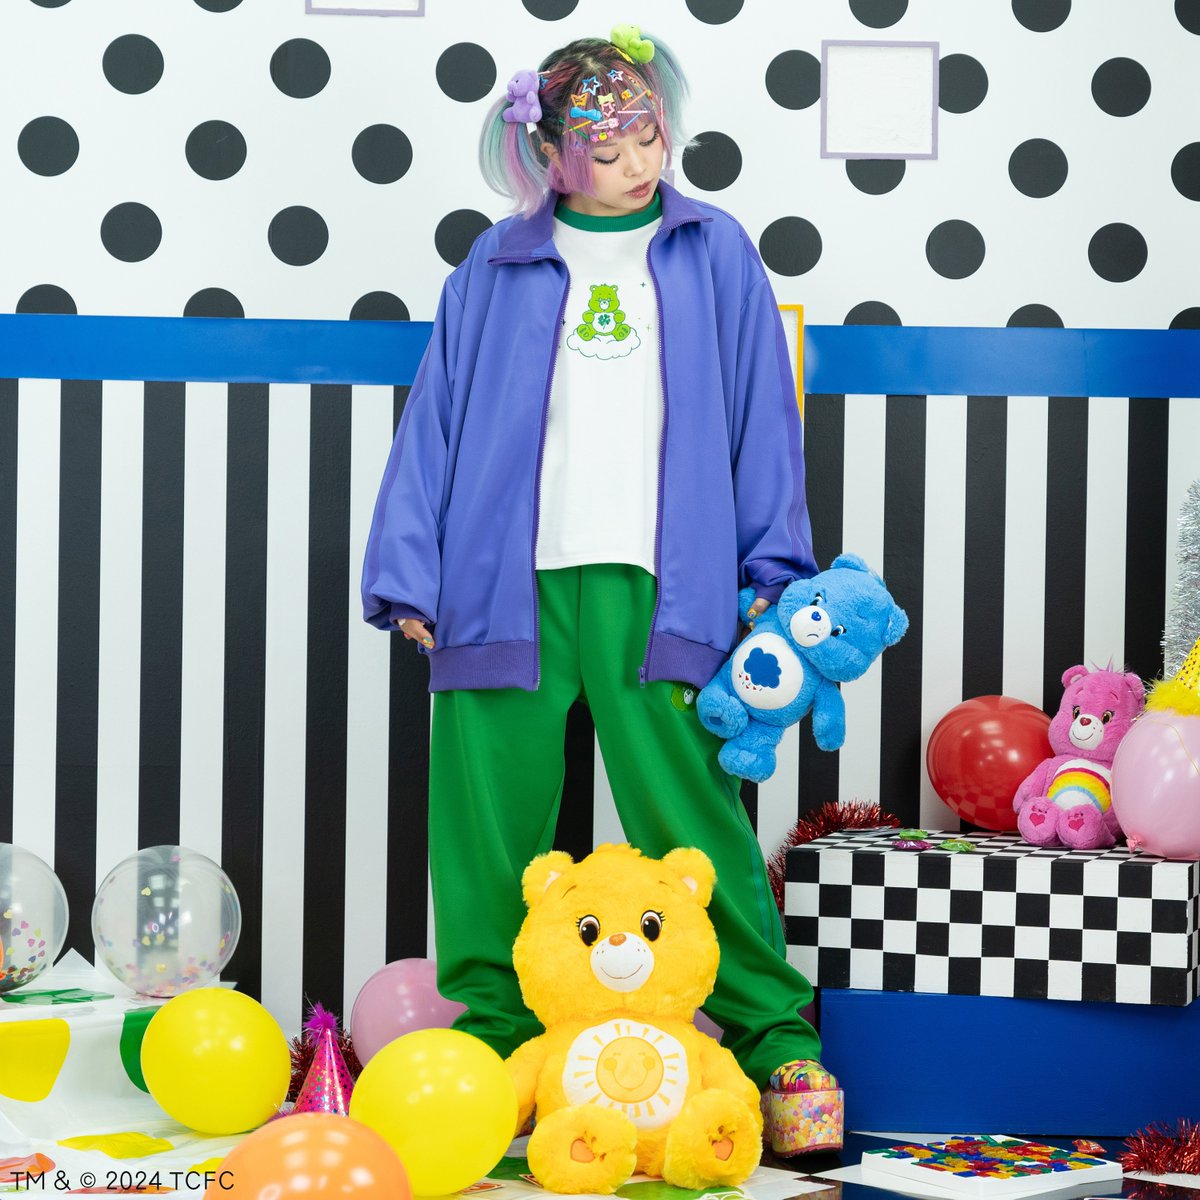 Make every day even more colorful with @acdcrag items featuring Care Bears🌈